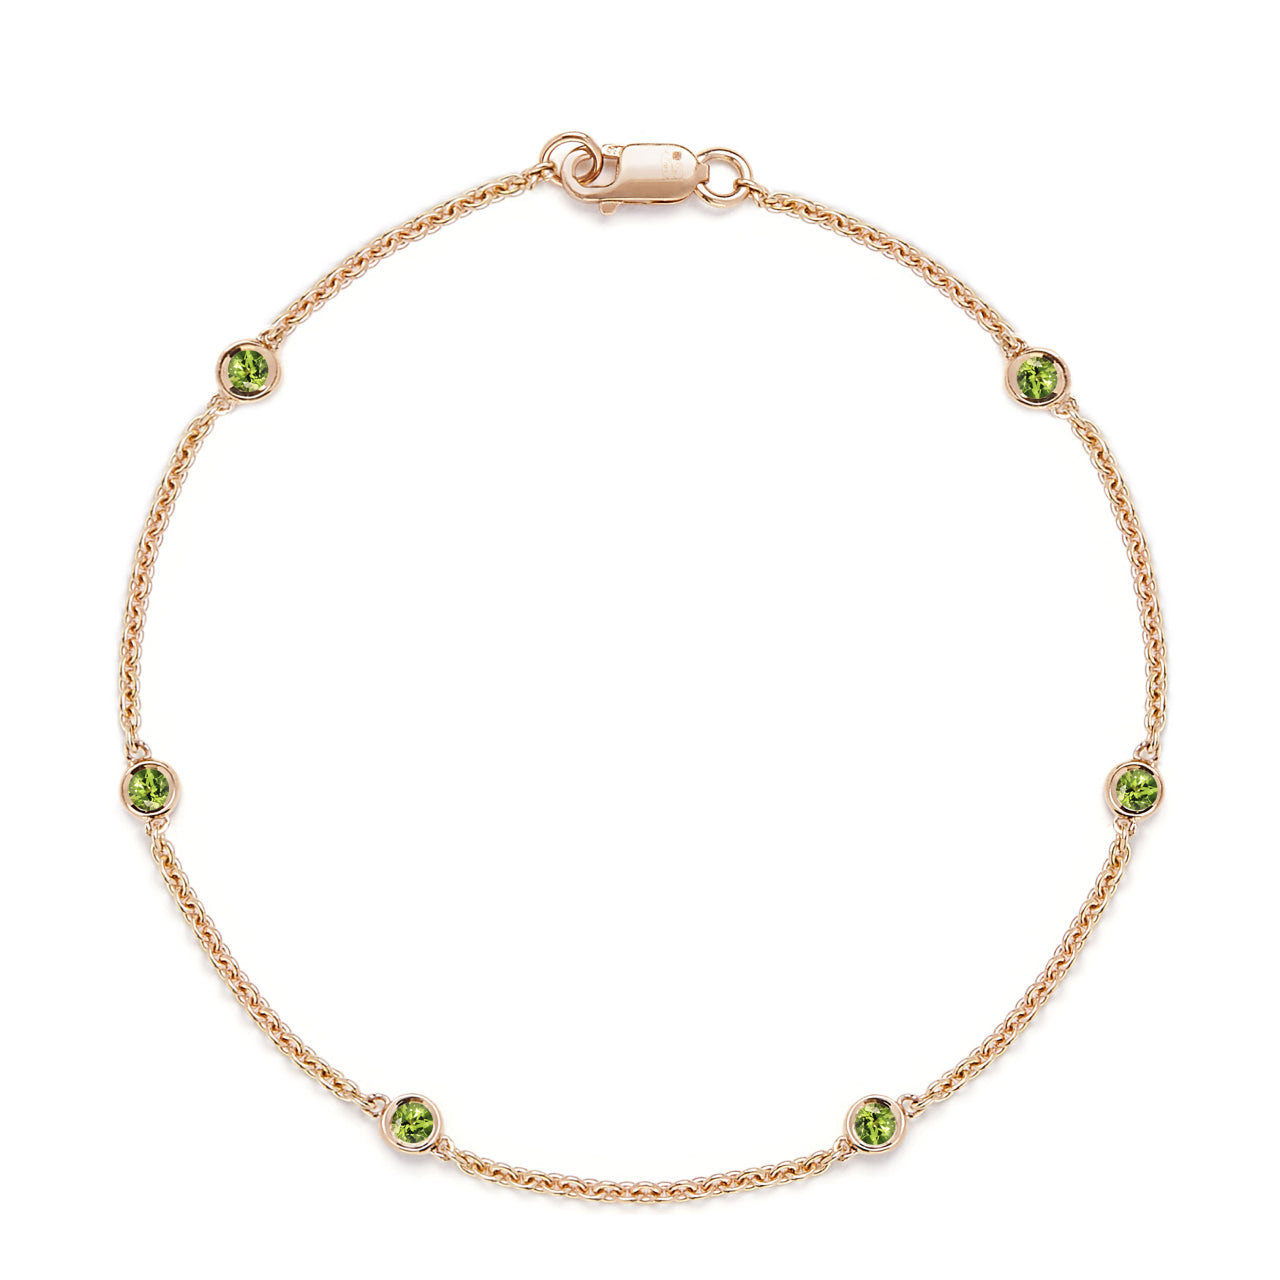 9ct Yellow Gold Chain Bracelet with Spectacle-Set Tsavorite